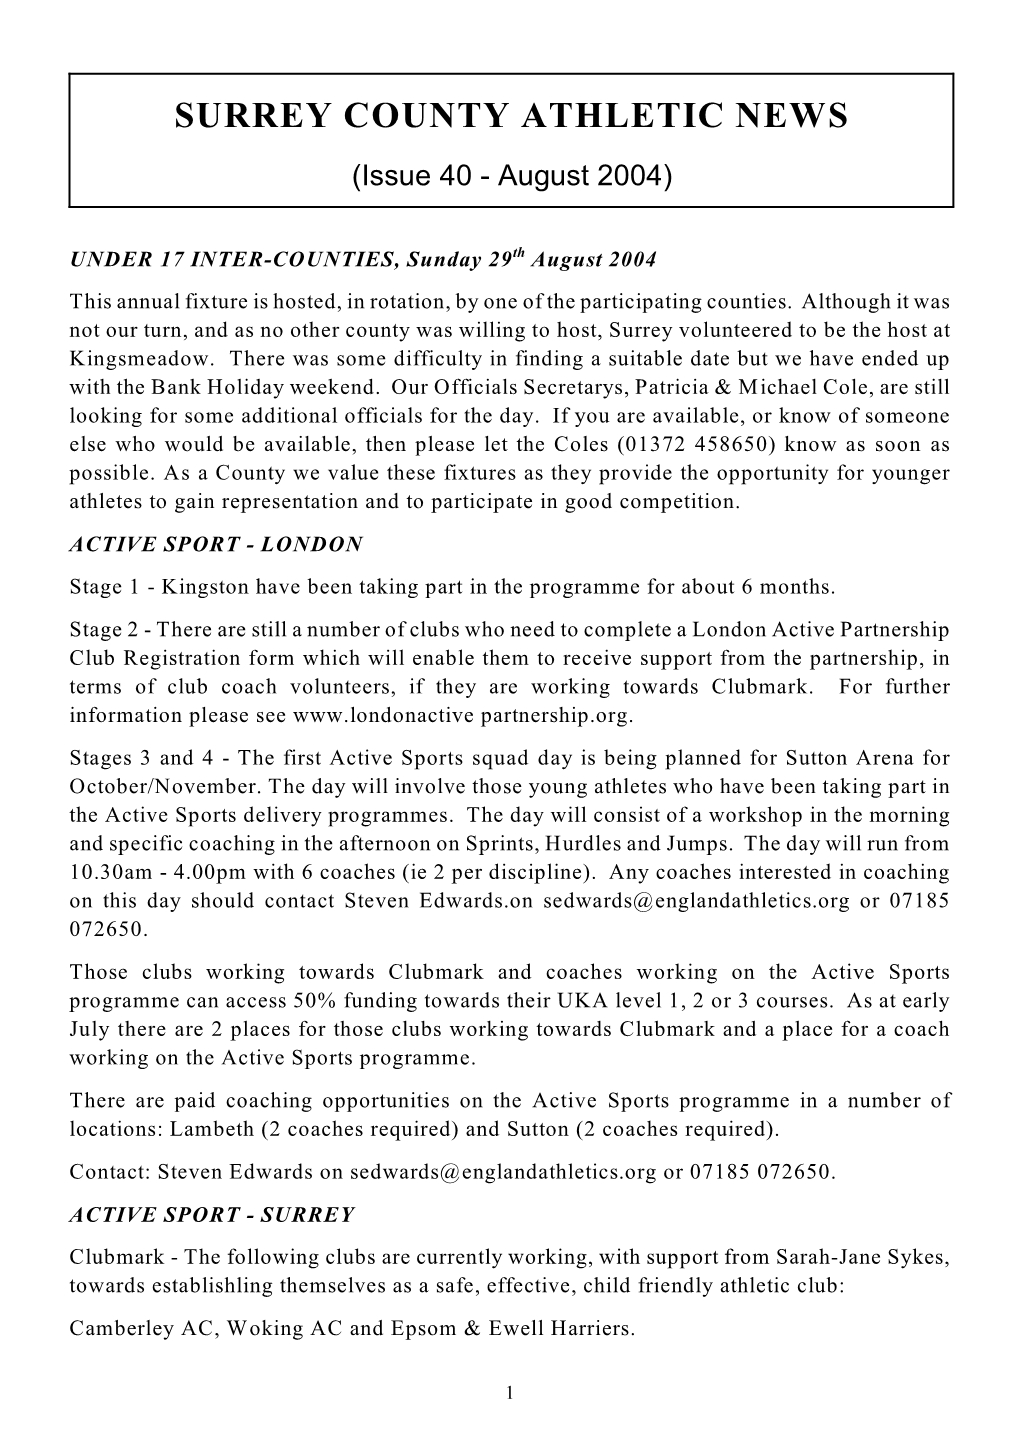 SURREY COUNTY ATHLETIC NEWS (Issue 40 - August 2004)